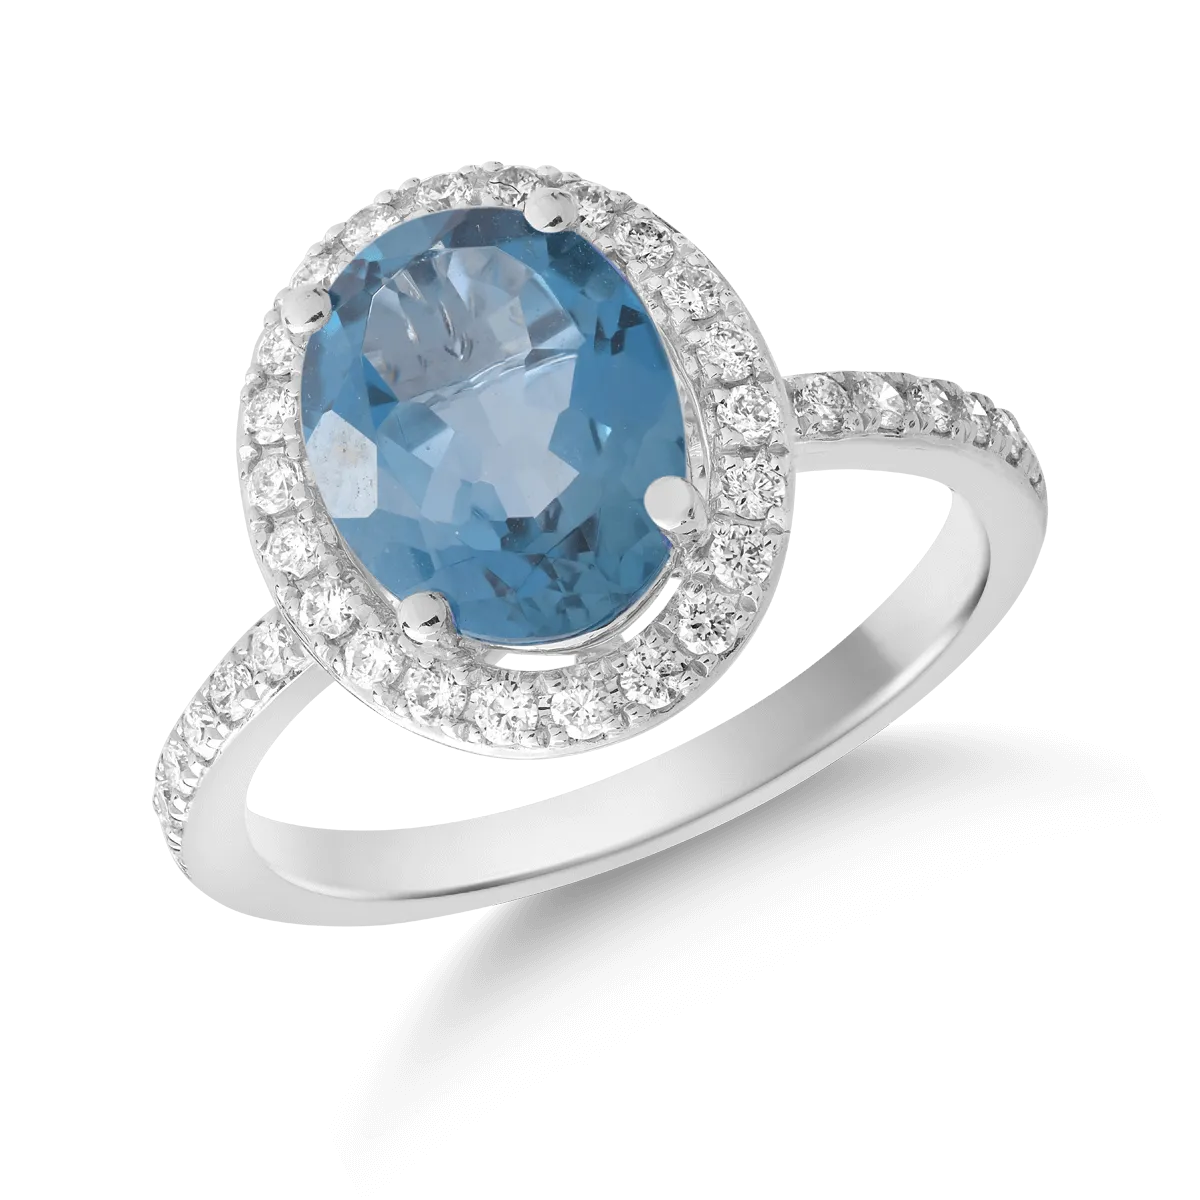 18K white gold ring with 2.43ct London blue topaz and 0.25ct diamonds